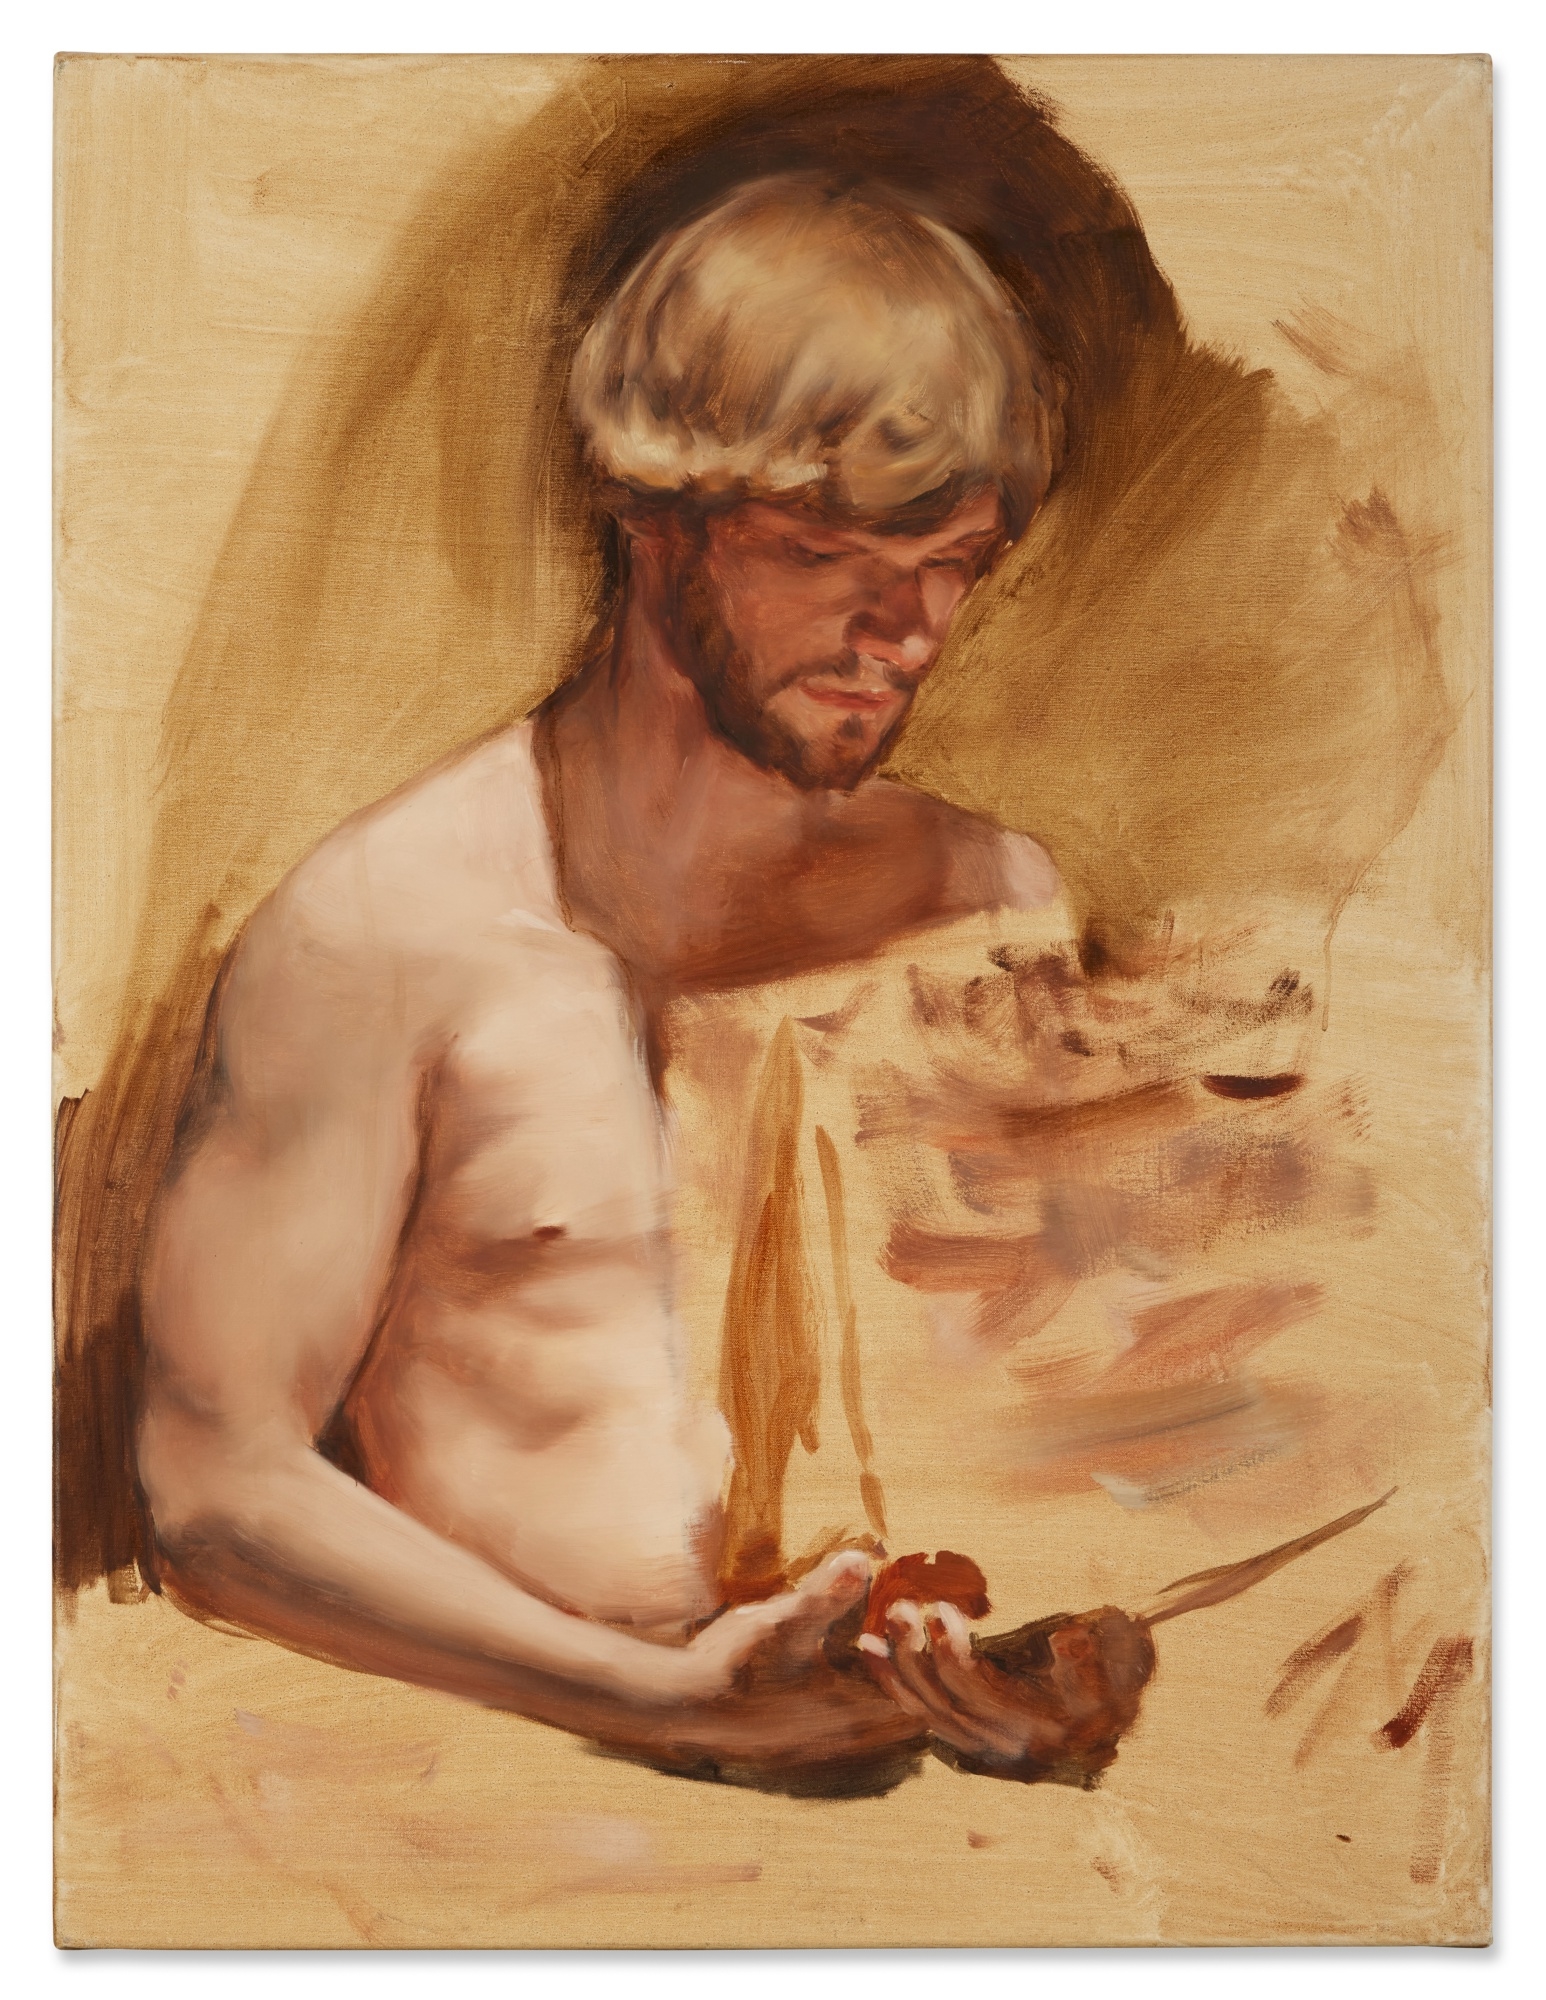 The Wedge by Michaël Borremans, dated 2007